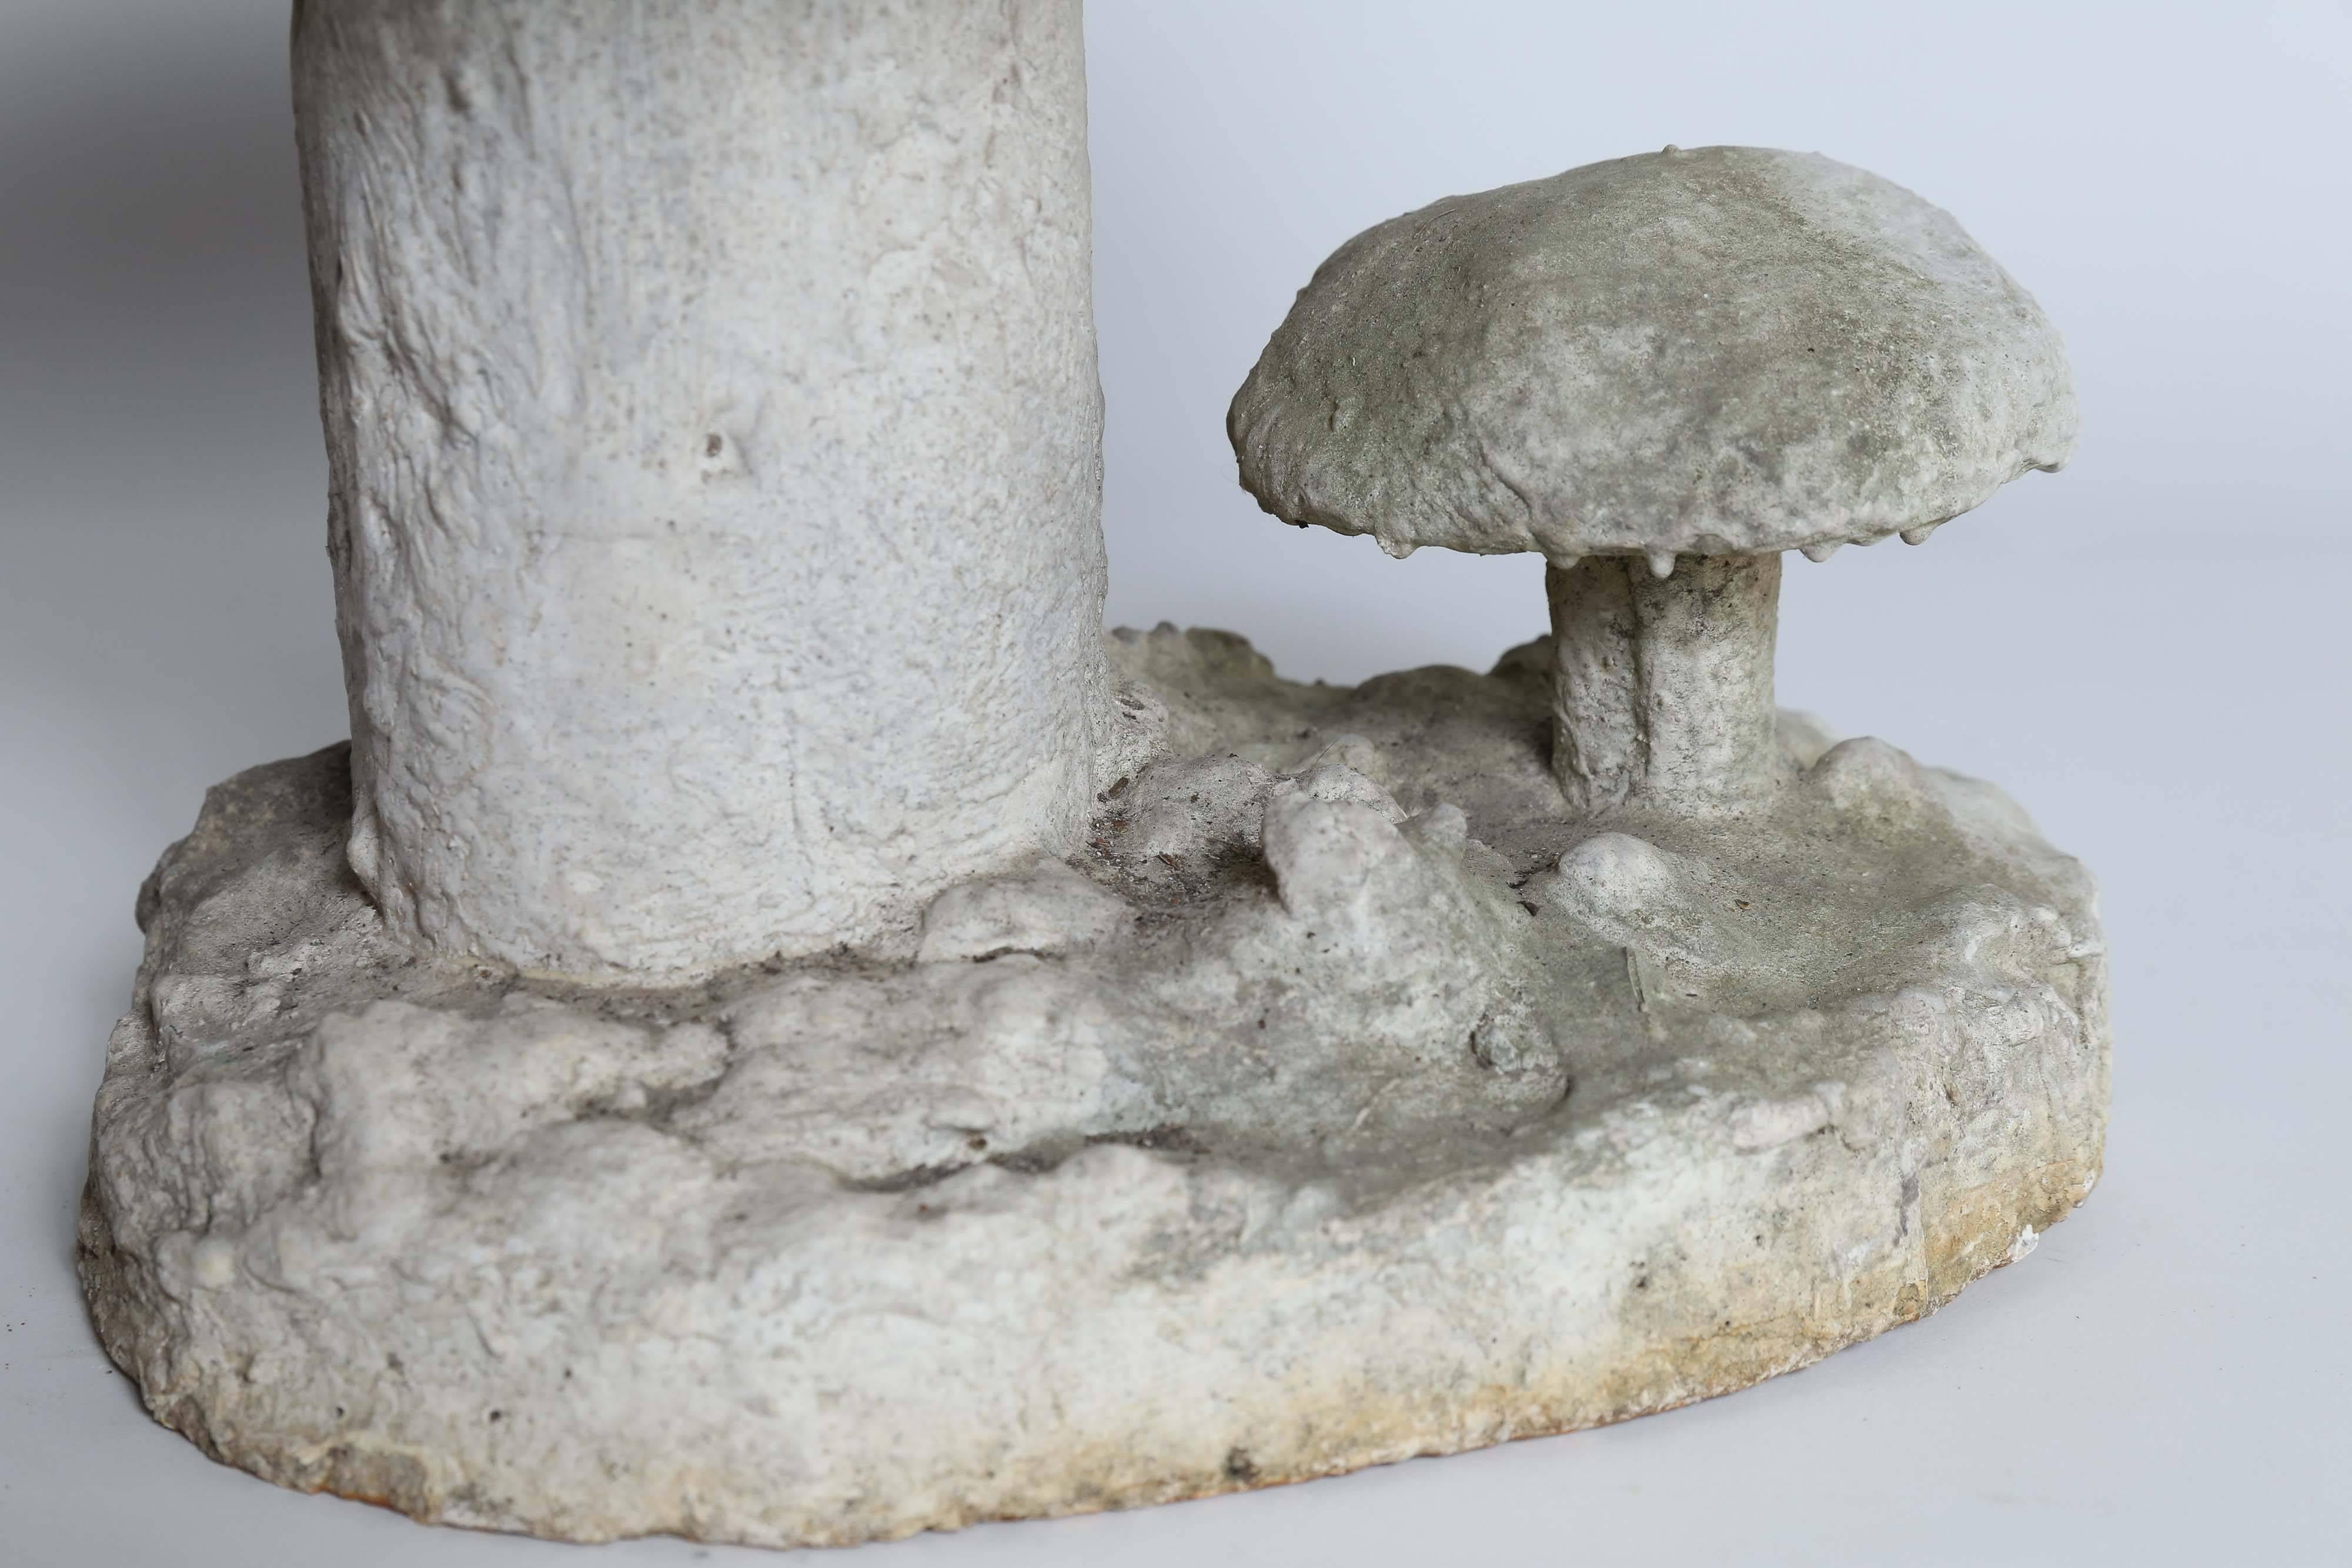 Found in France, two magic mushrooms in concrete stand ready to add a note of whimsy to the garden.